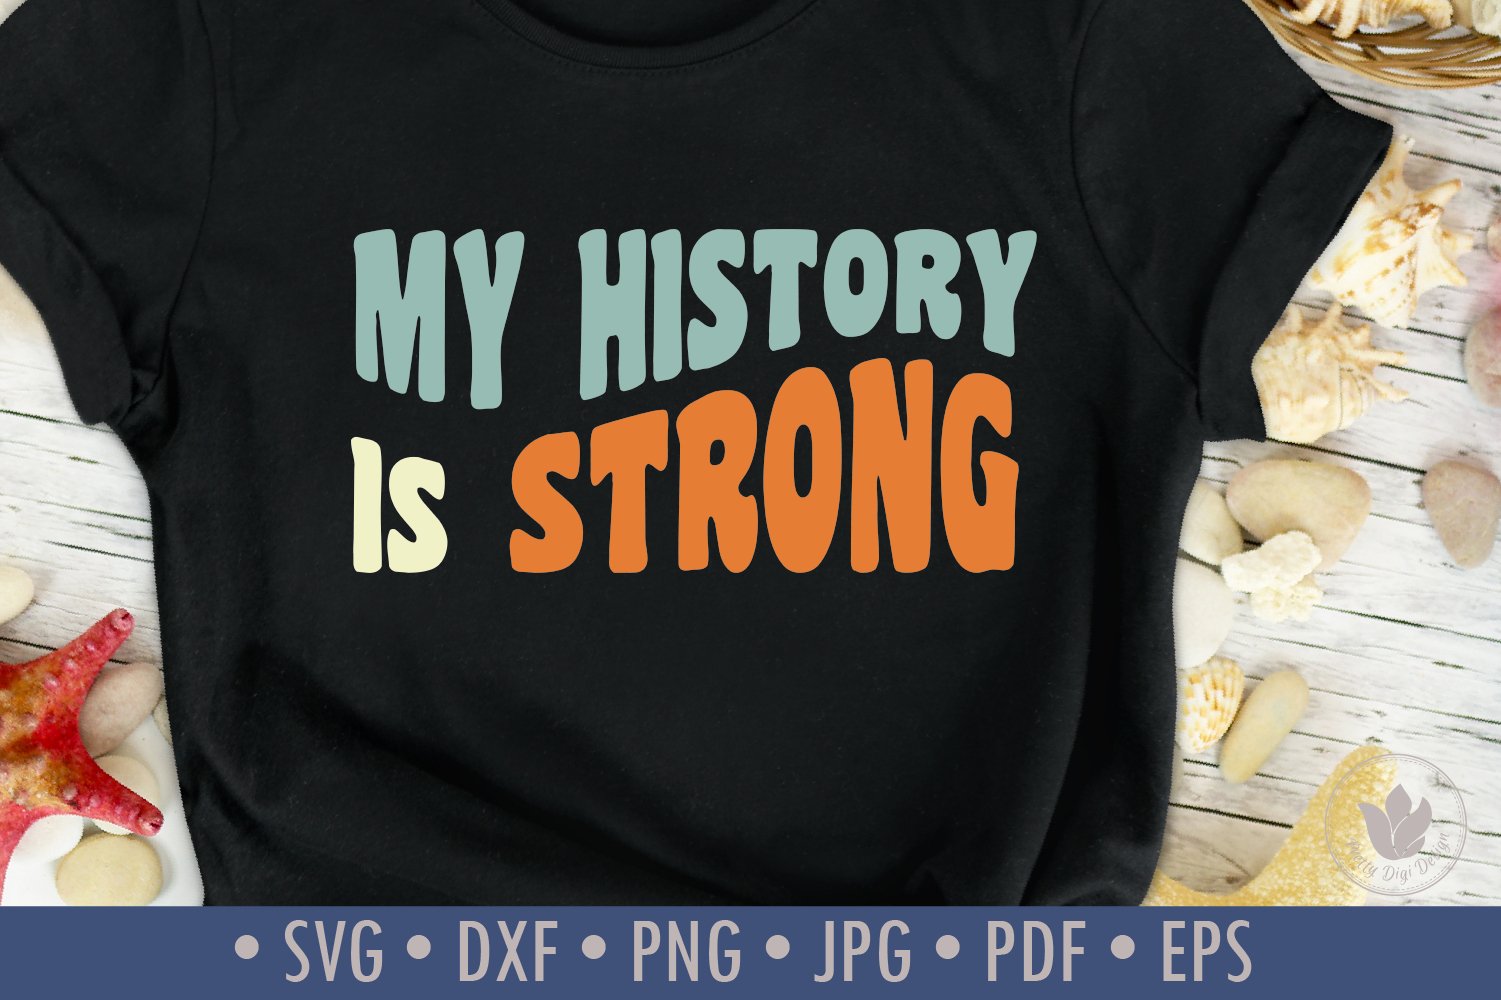 T-shirt in black color with a beautiful print with the inscription "My history is strong".